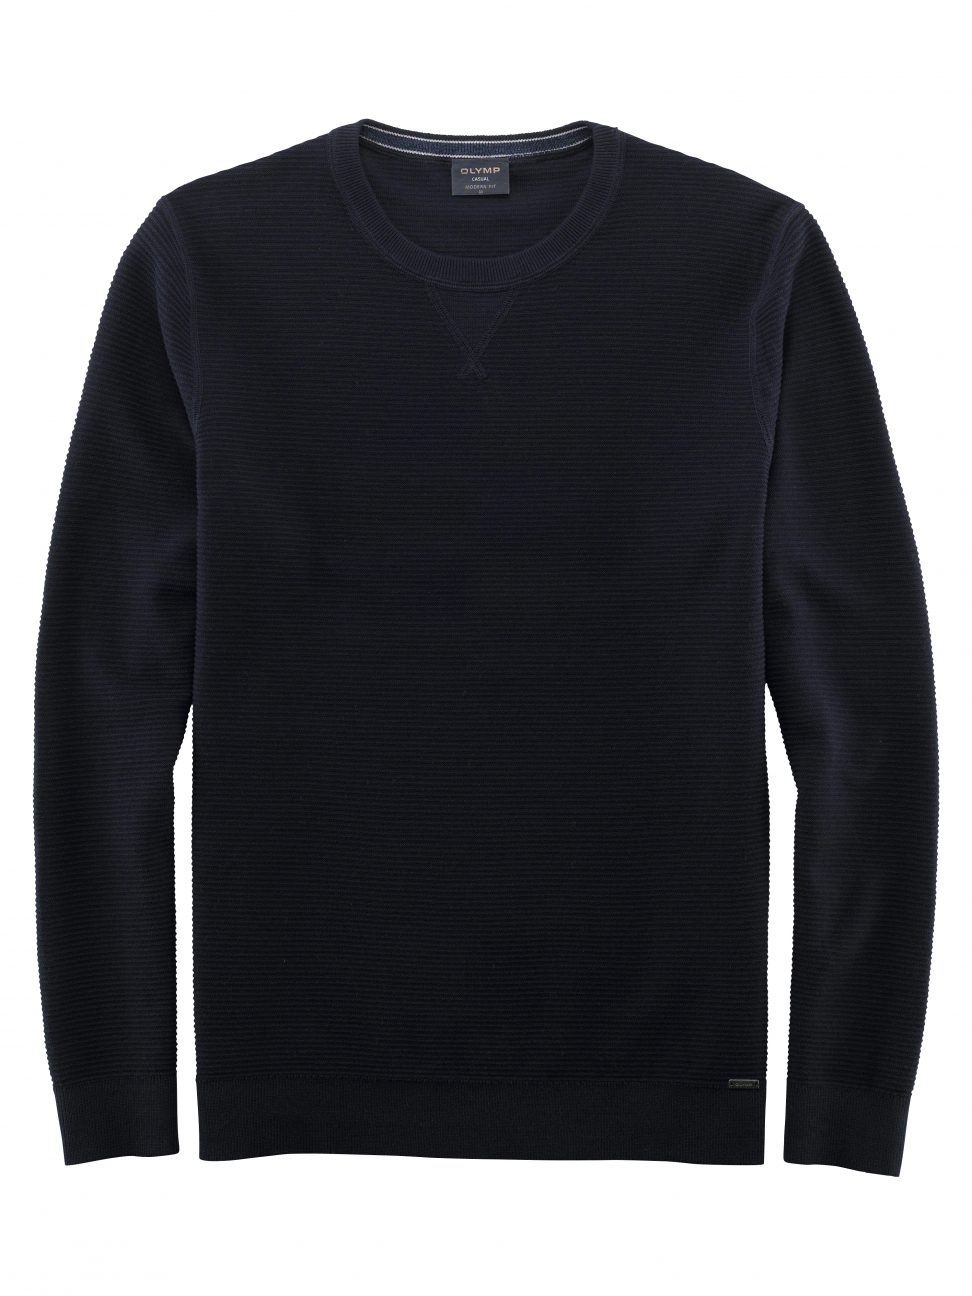 Olymp Sweter modern fit / Marine / Pullover crew neck / 53018518